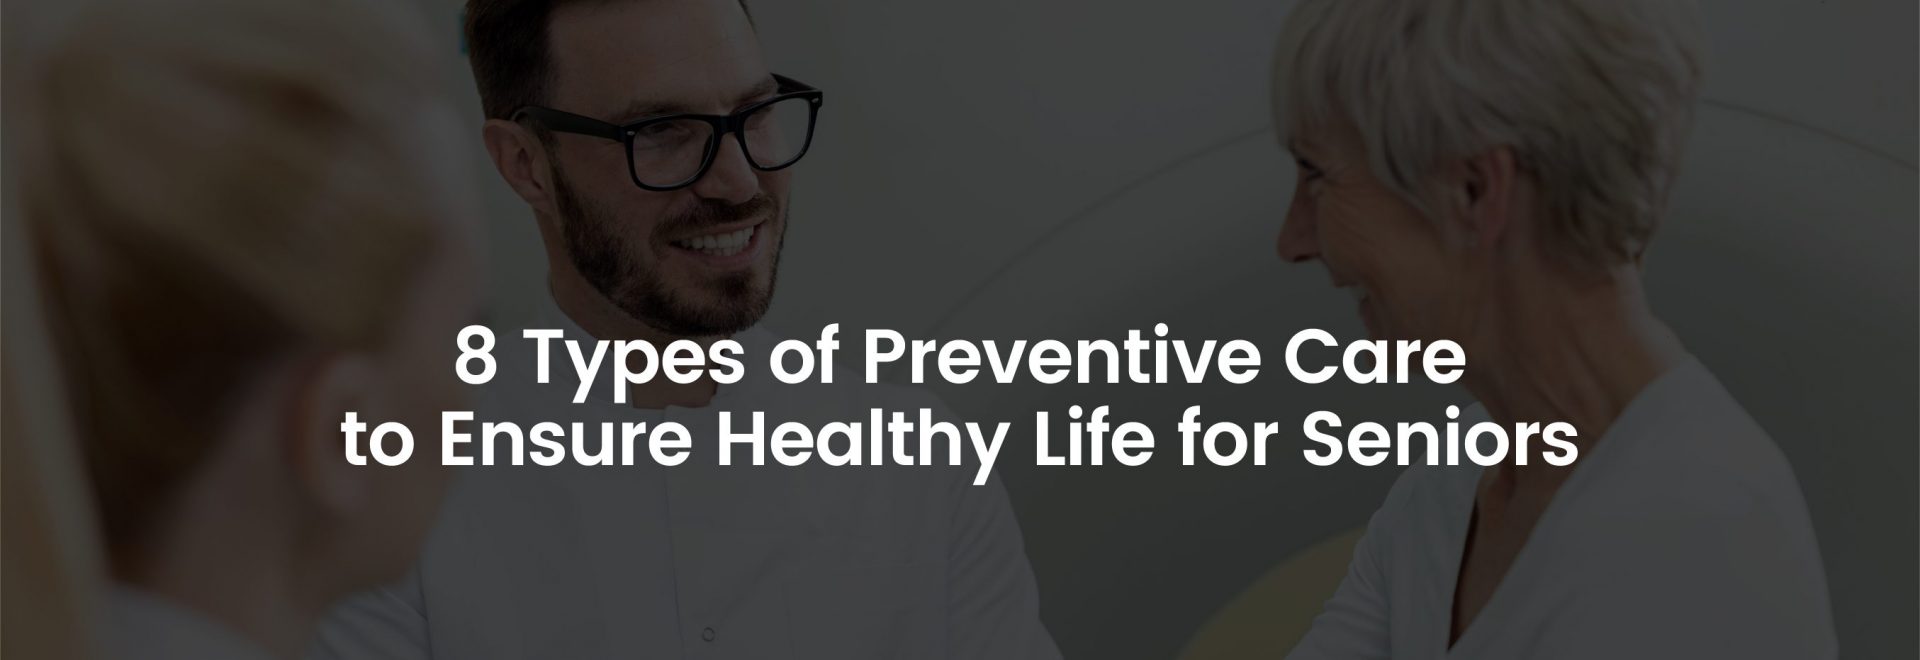 8 Types Preventive Care to Ensure Healthy life for Seniors | Banner Image